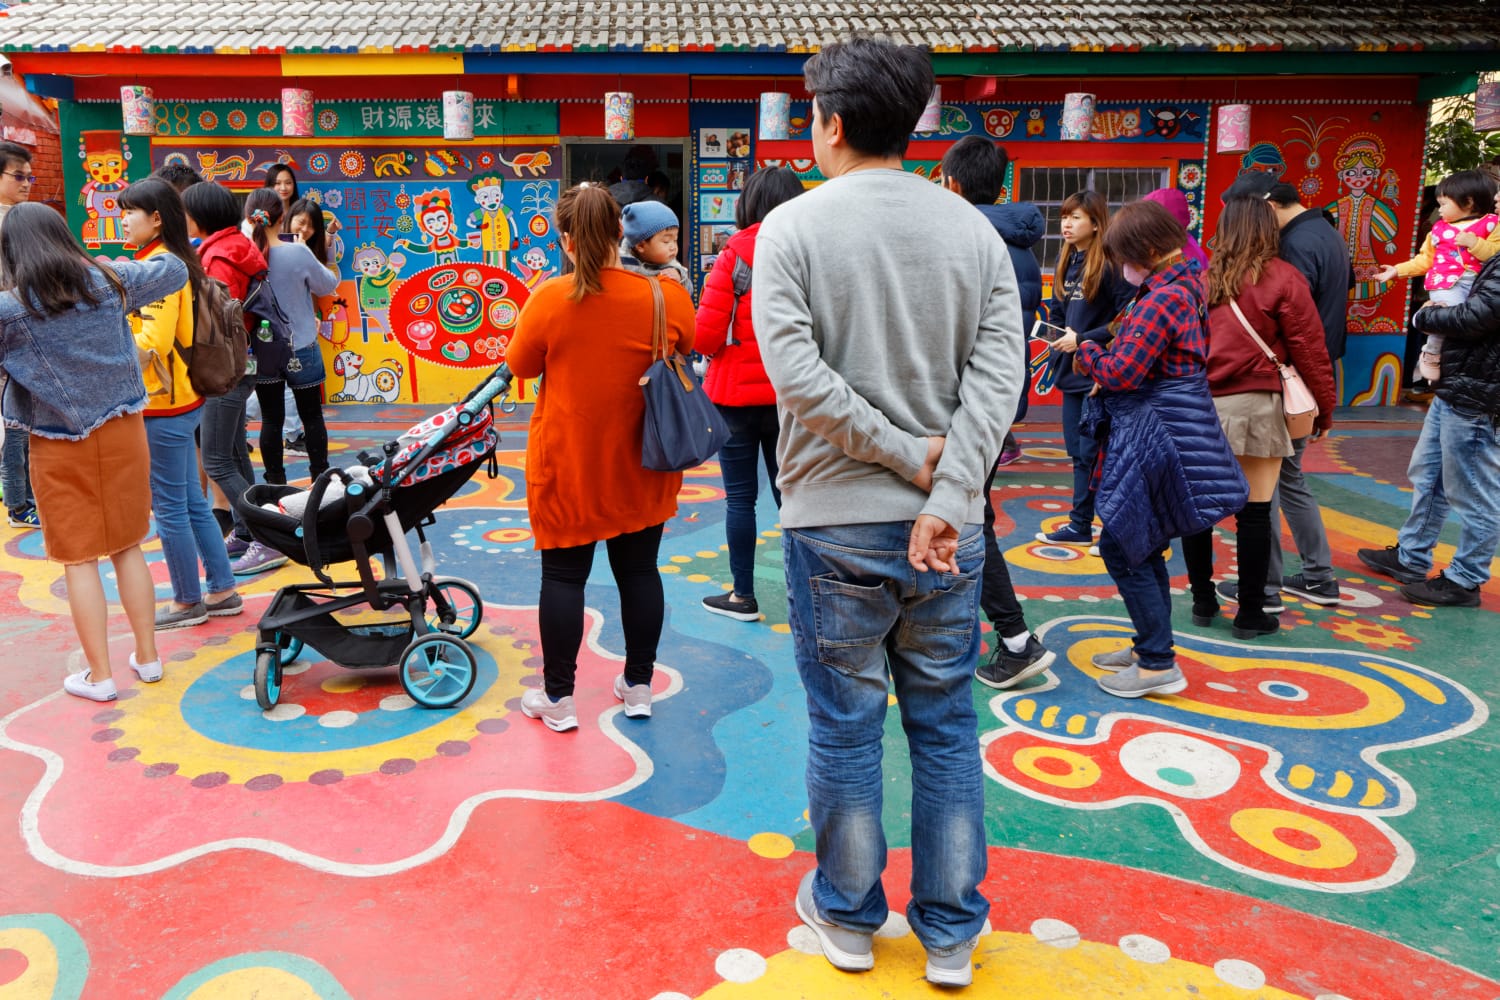 The forecourt outside Rainbow Village in Taichung, Taiwan. The concrete ground is covered in colorful art, as are the buildings in the distance. The forecourt is crowded with people.